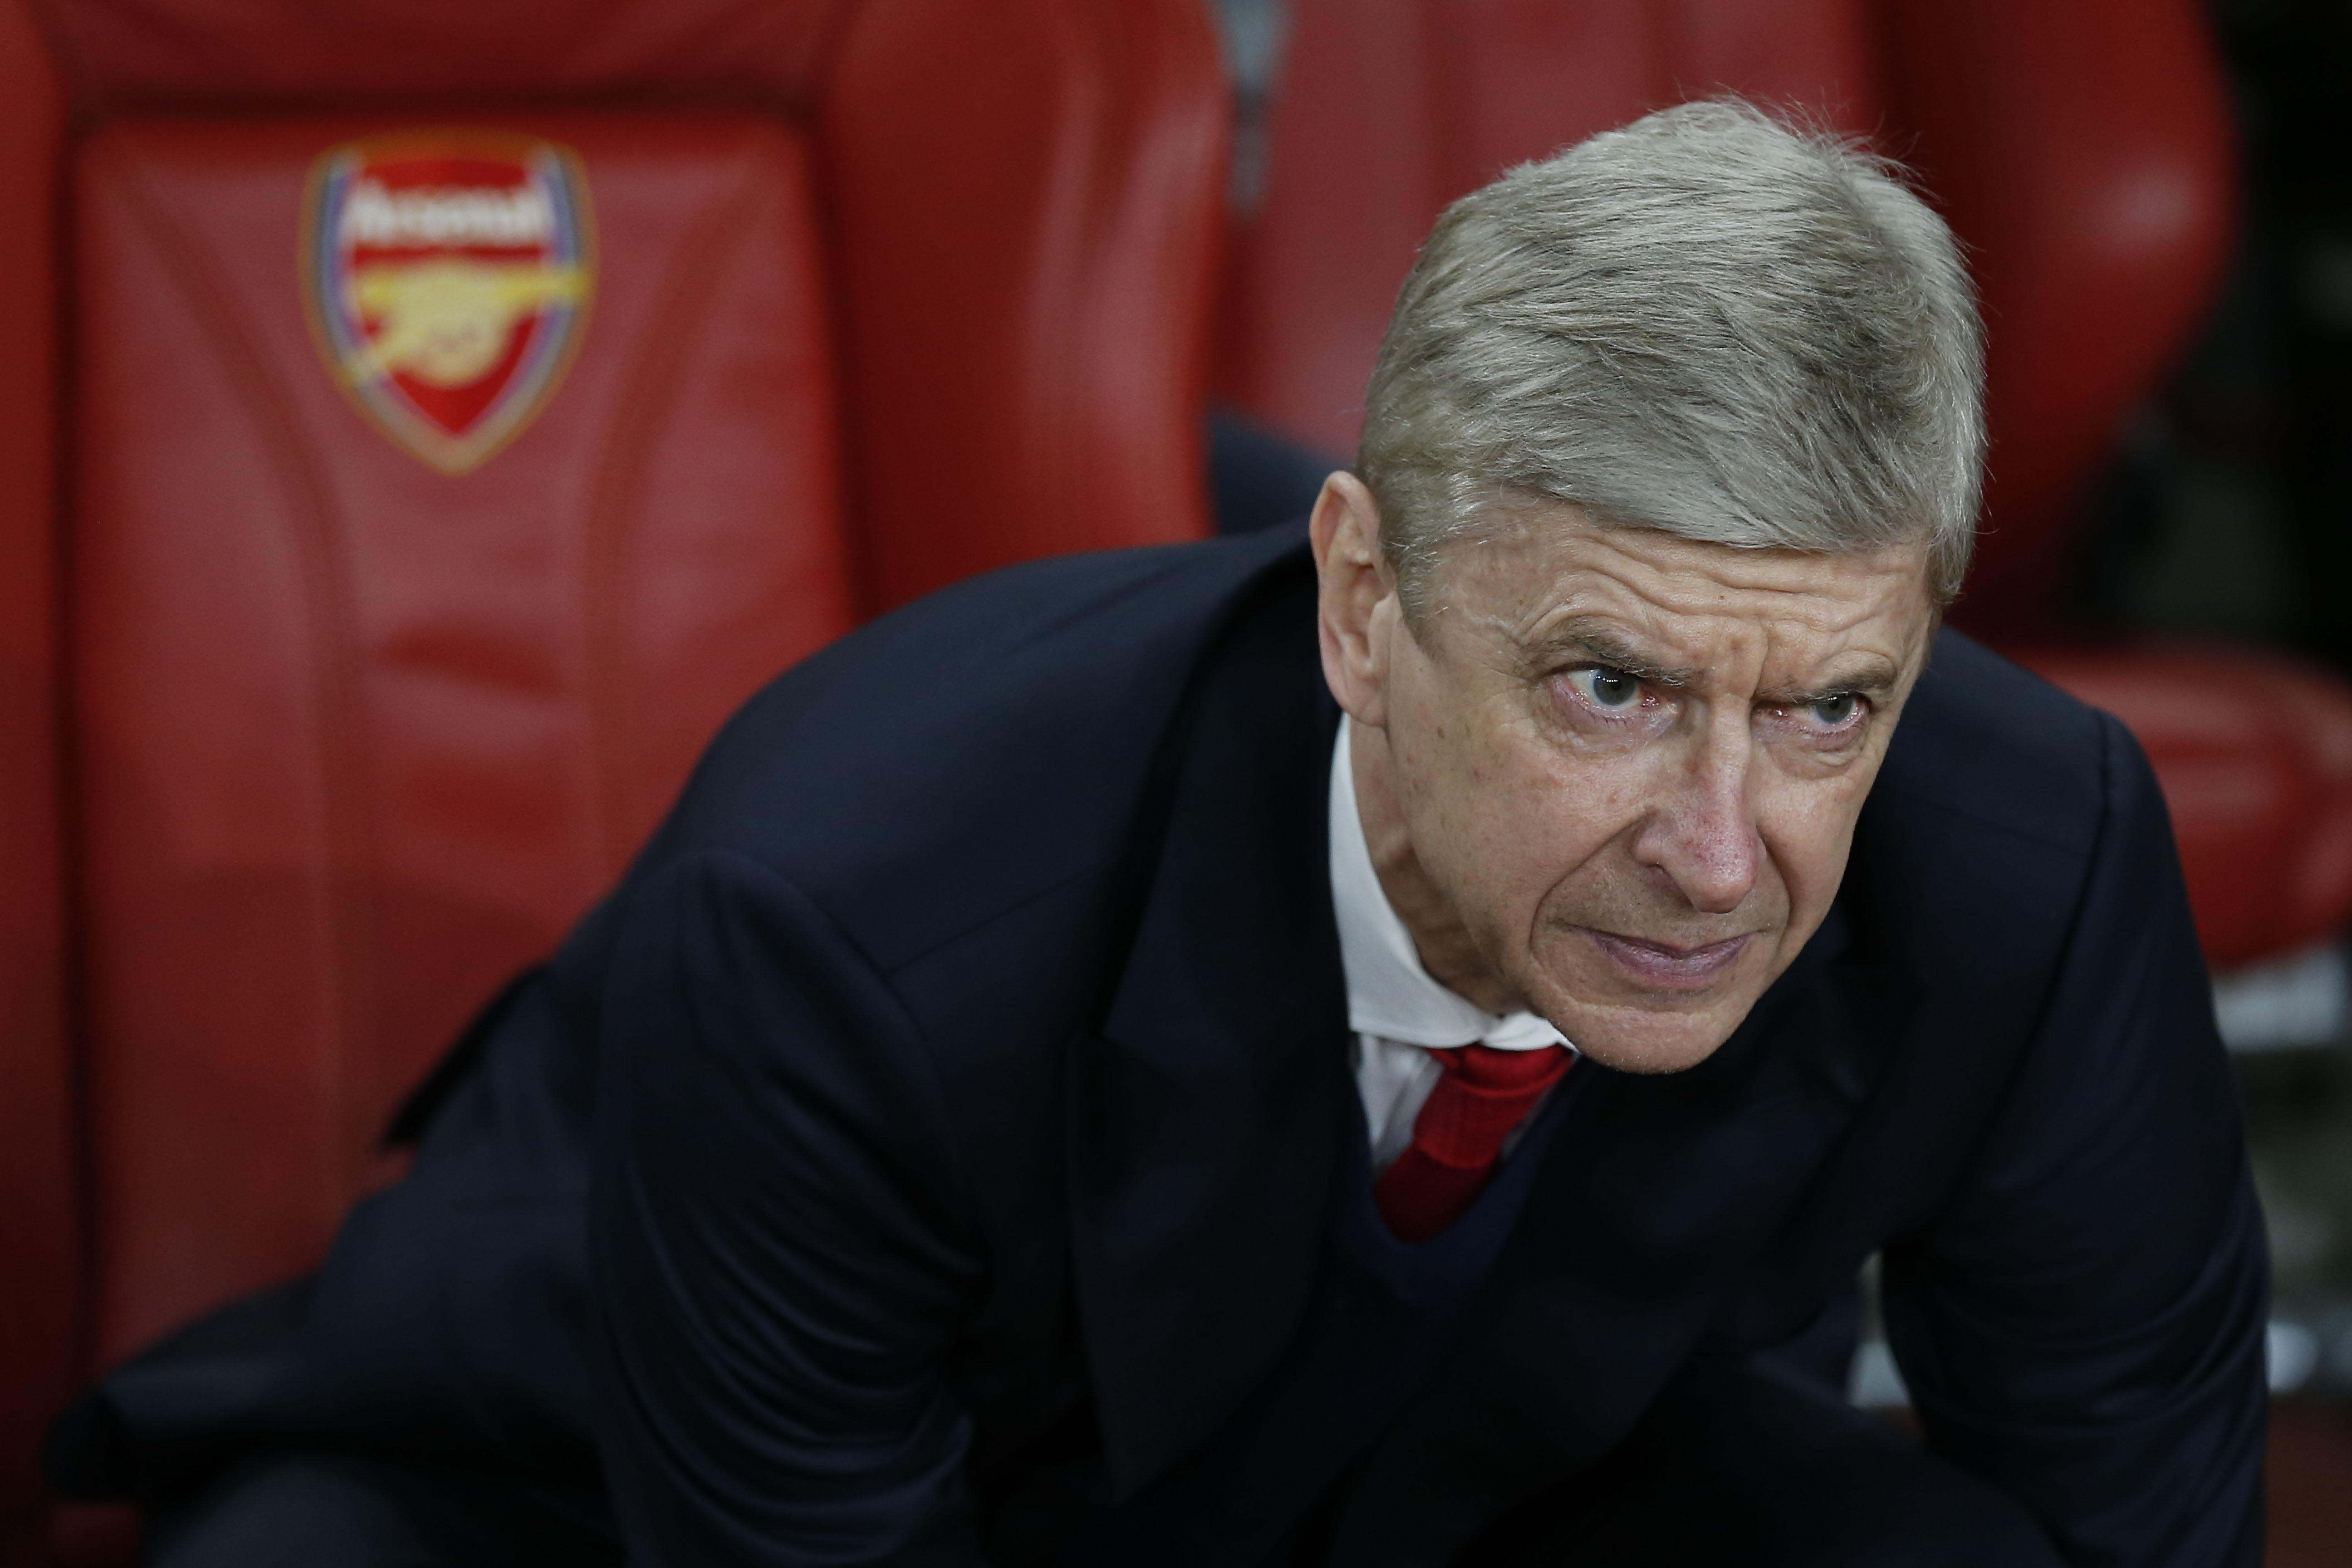 Arsenal's French manager Arsene Wenger looks on before the UEFA Champions League last 16 second leg football match between Arsenal and Bayern Munich at The Emirates Stadium in London on March 7, 2017. / AFP PHOTO / IKIMAGES / Ian KINGTON        (Photo credit should read IAN KINGTON/AFP/Getty Images)